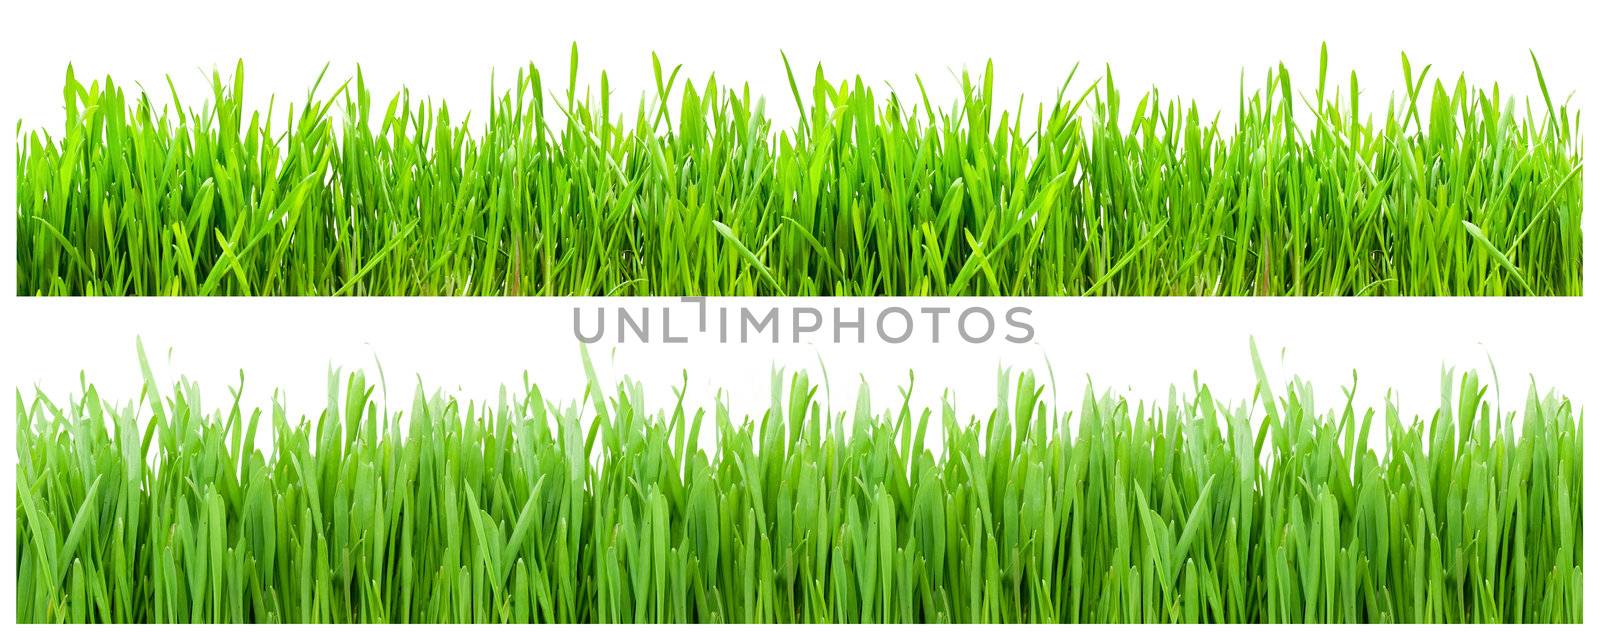 Two types of green grass on white background